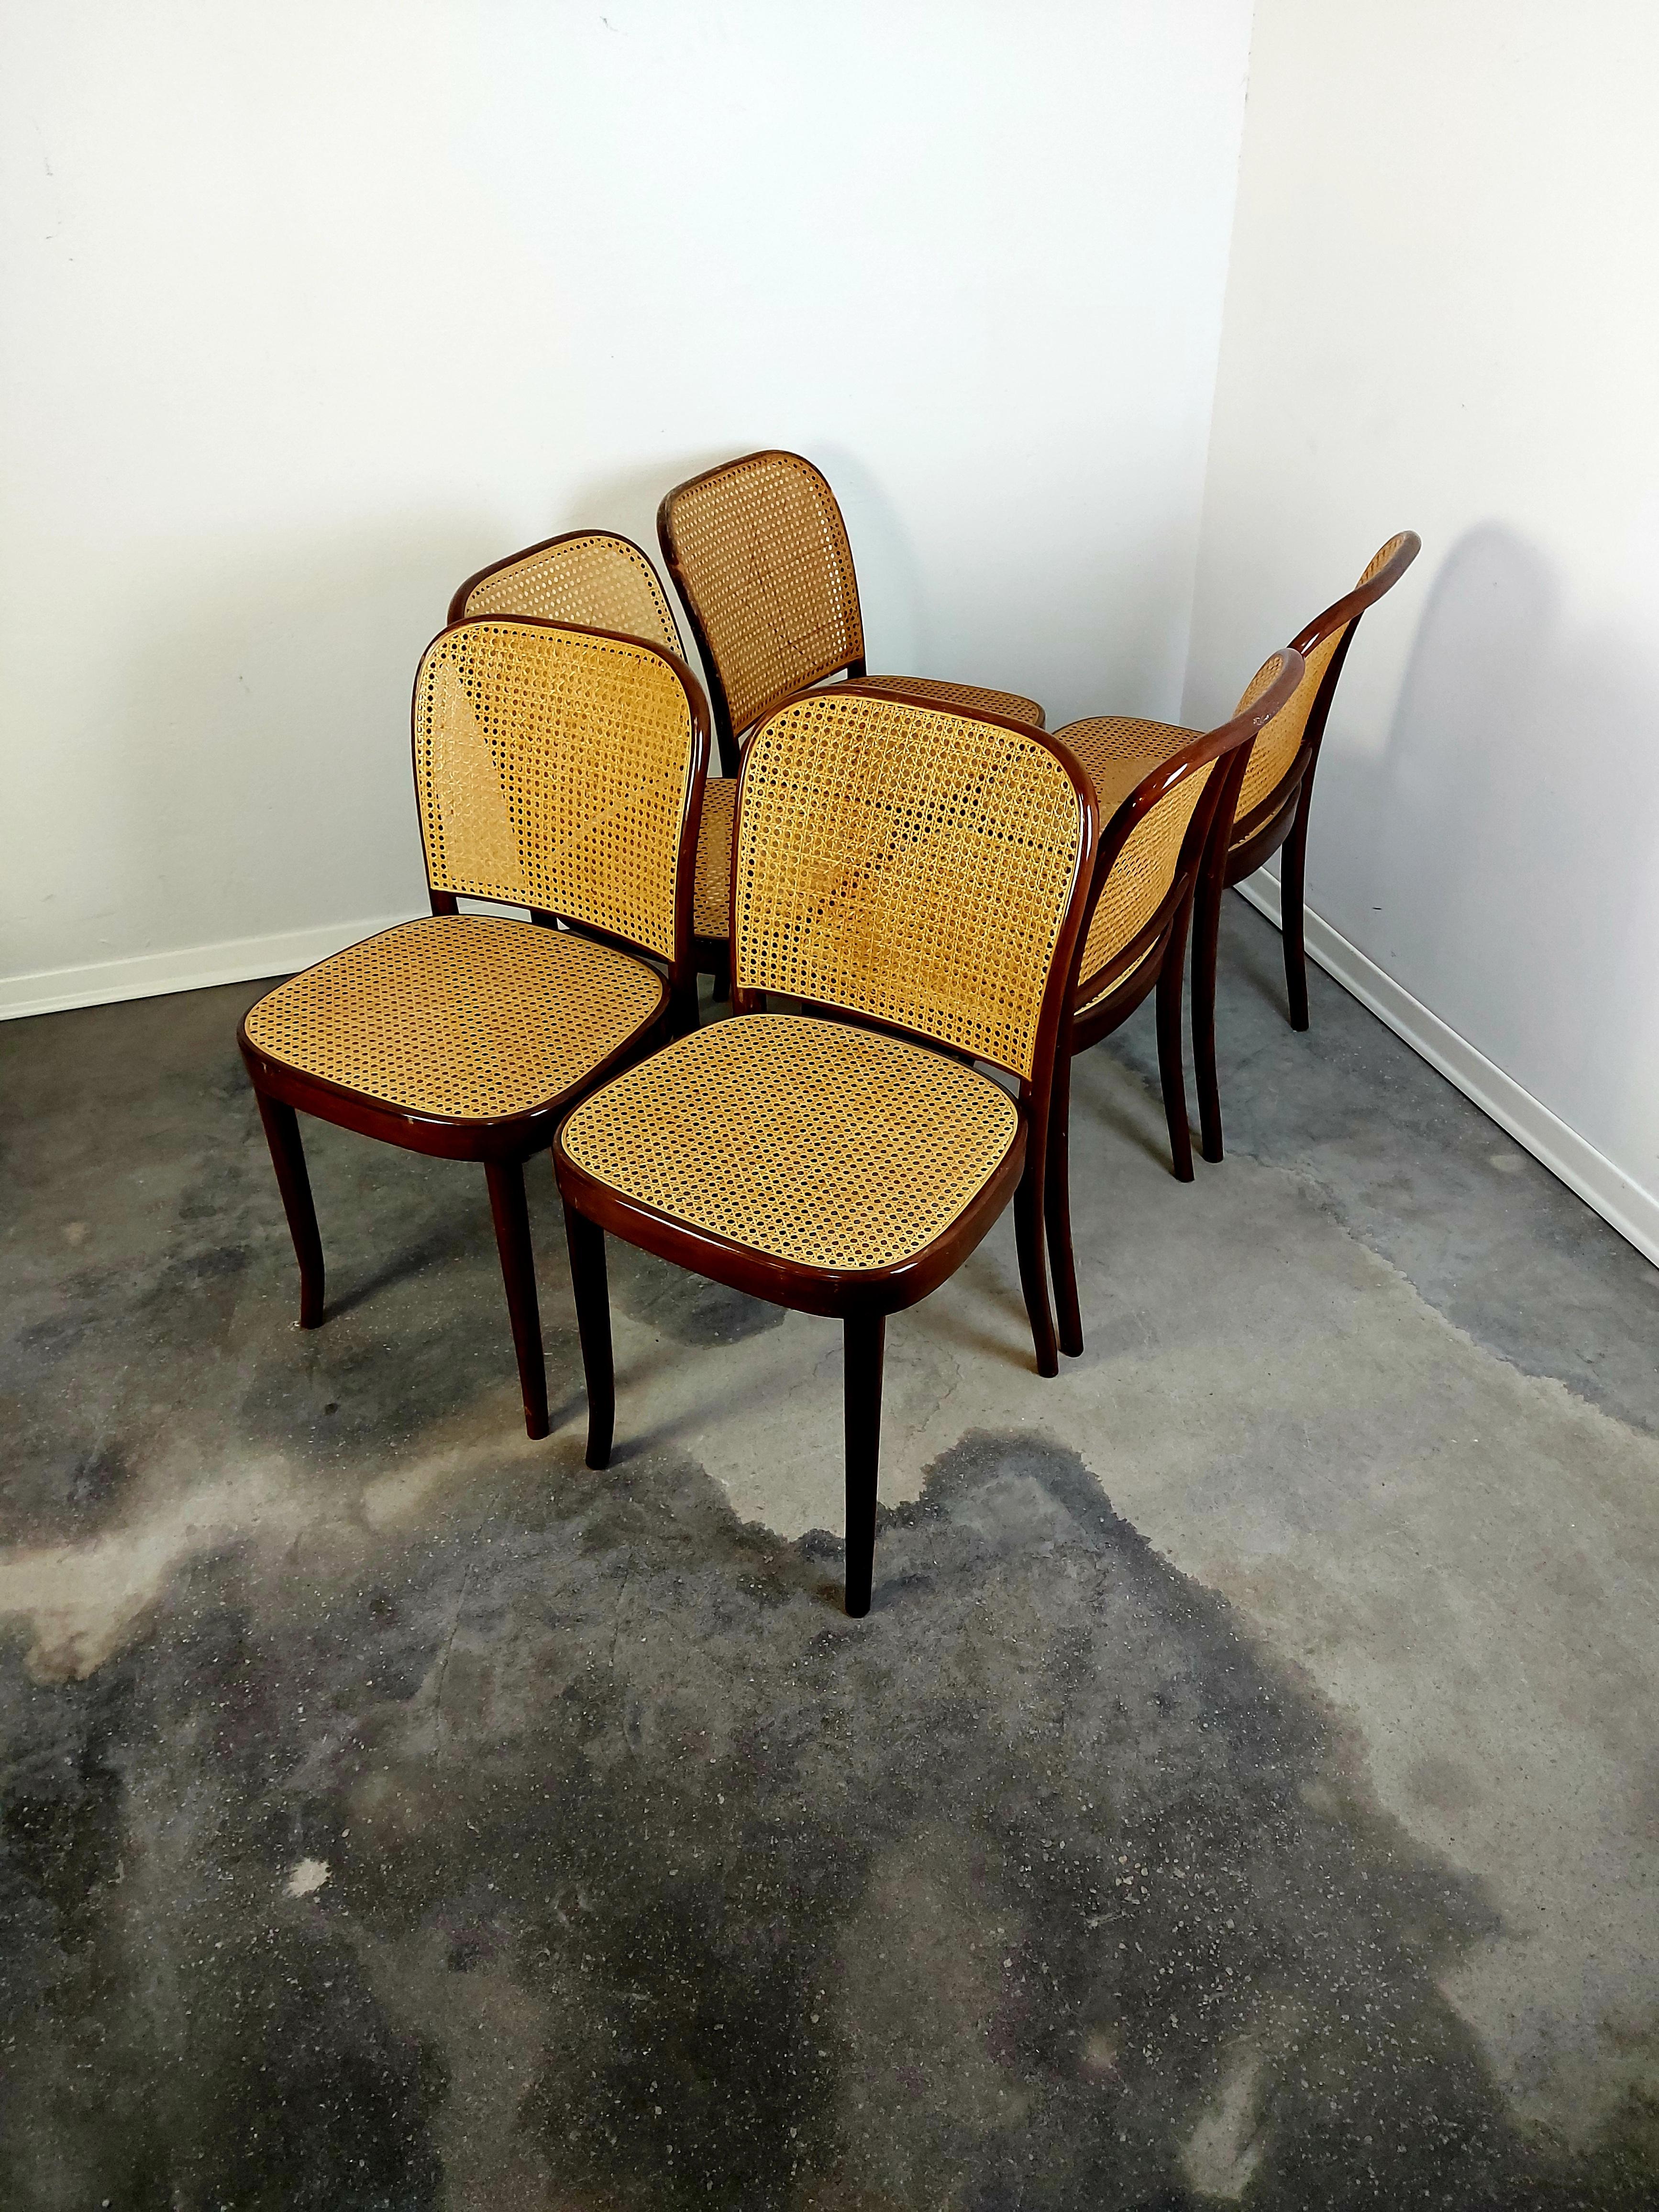 Cane Prague Chair, no. 811 Bentwood chair, 1980s, 1 of 4